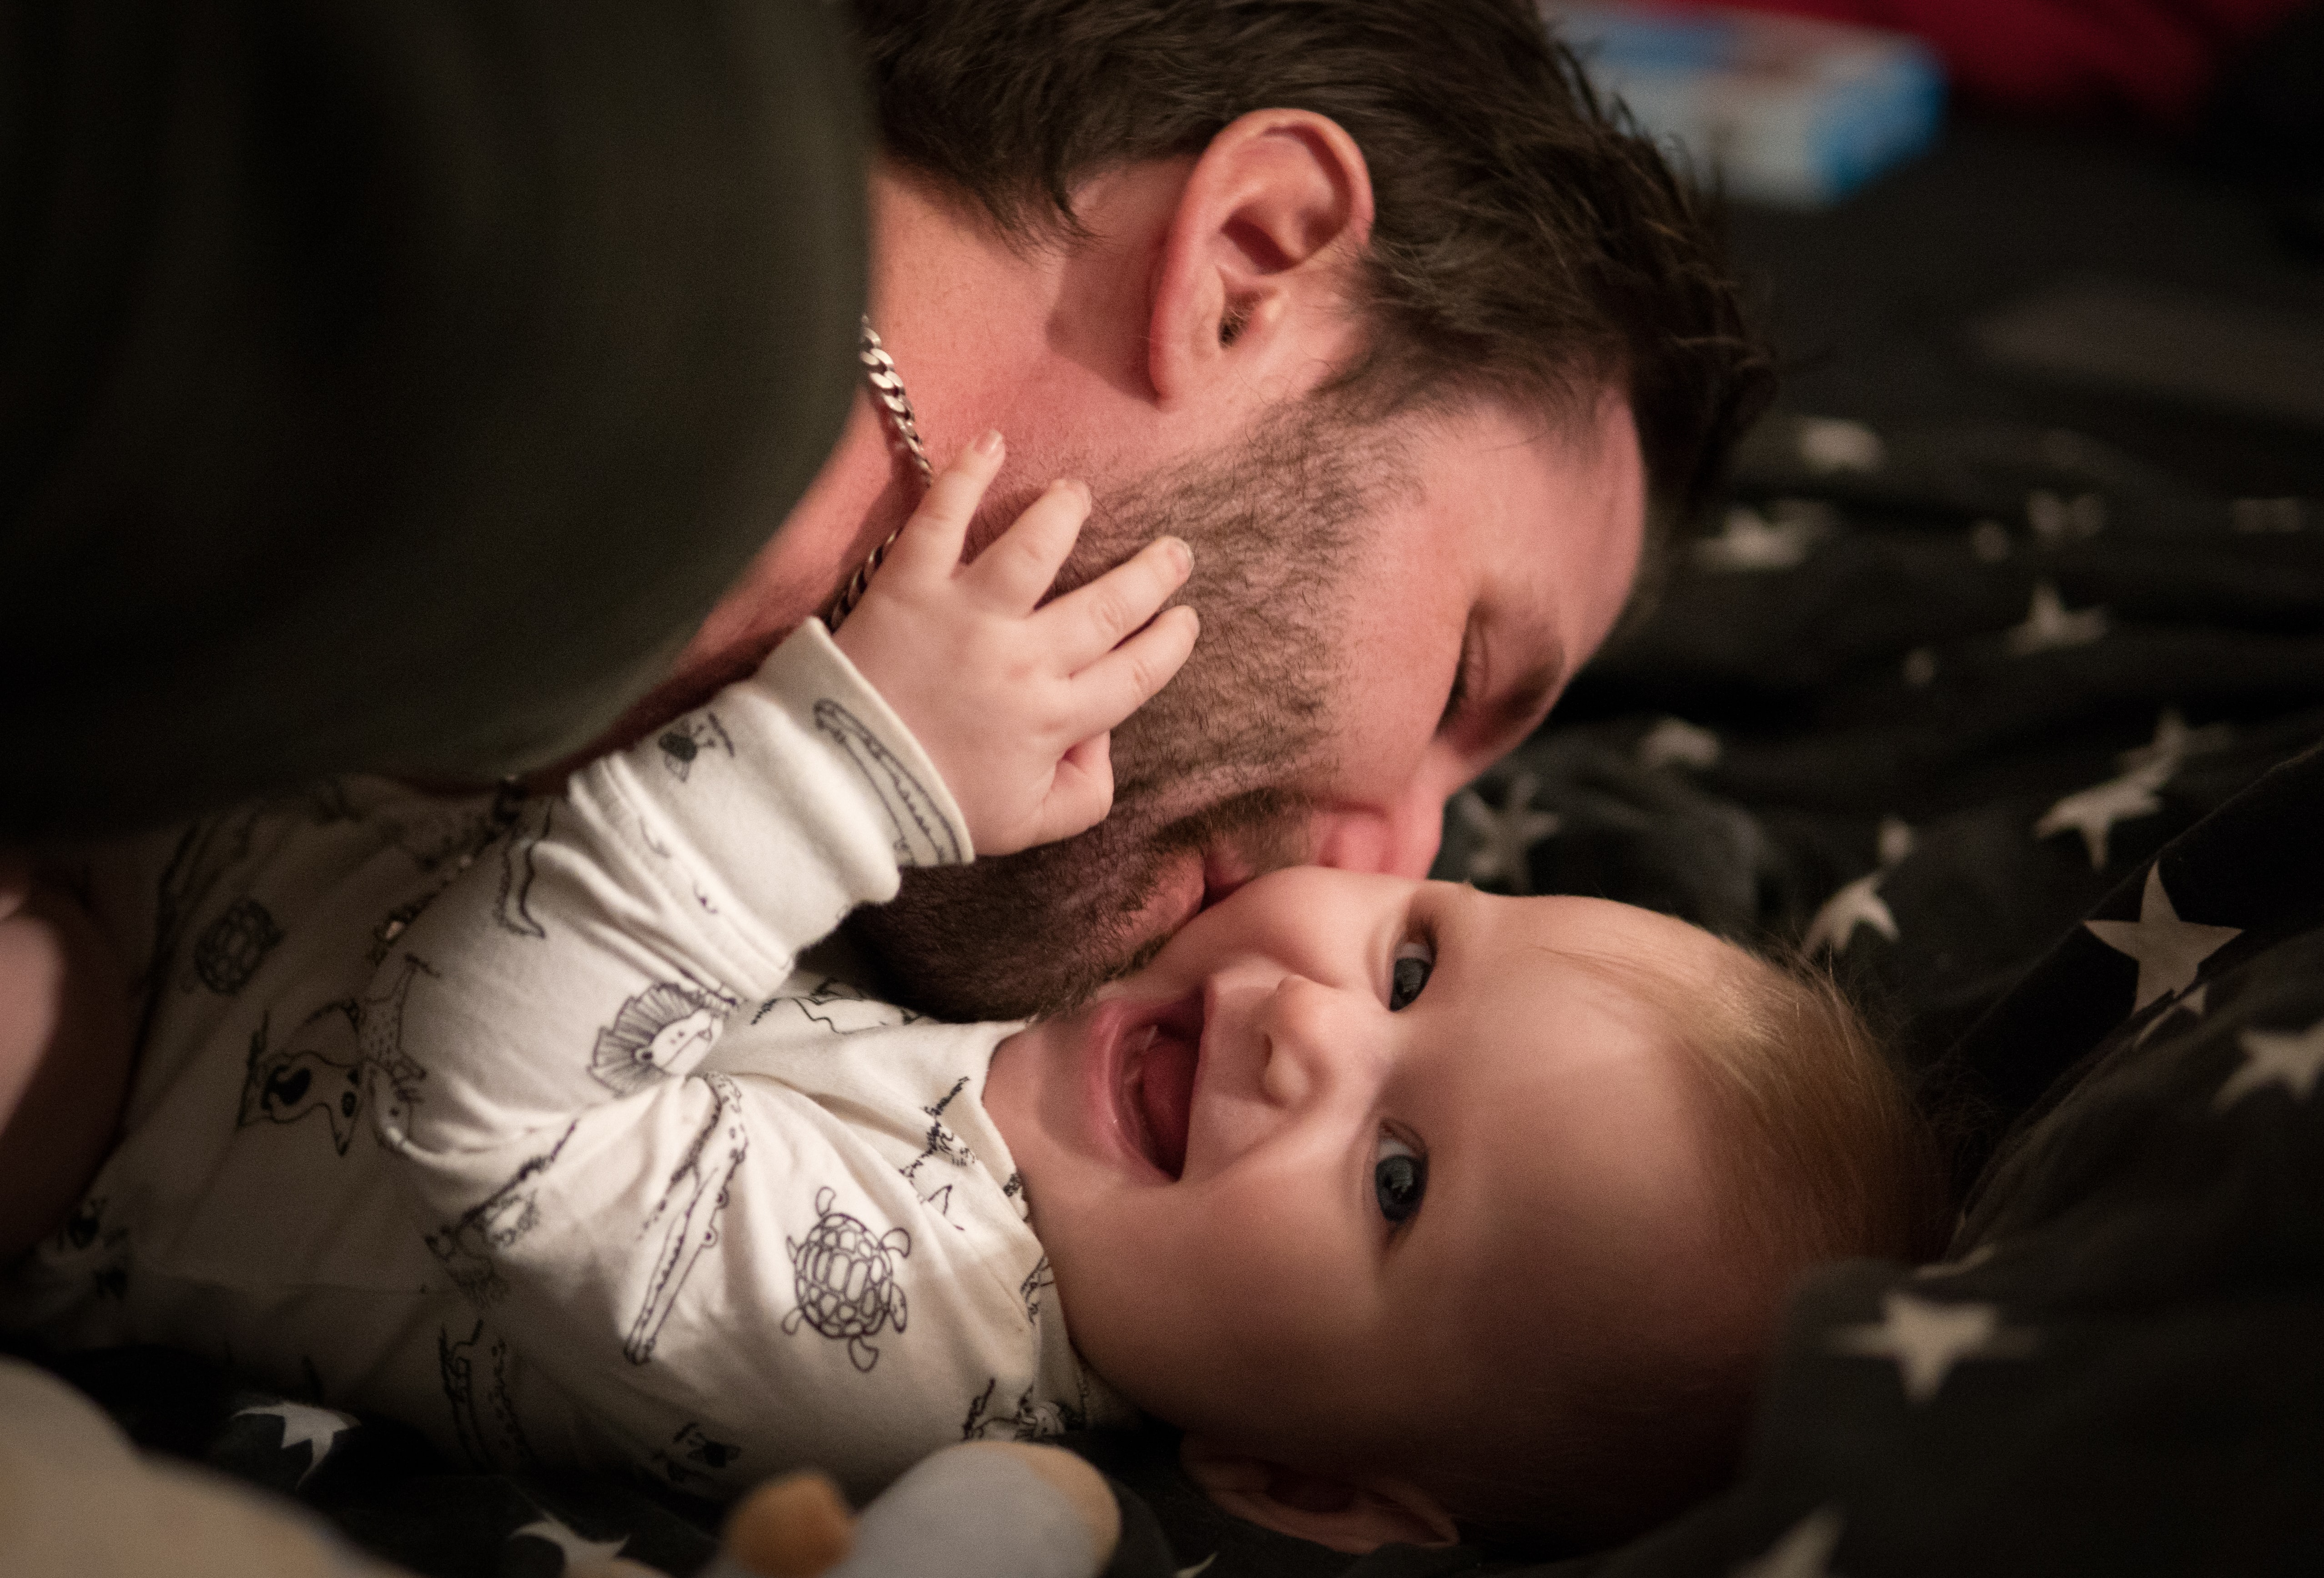 A father kisses a laughing baby.